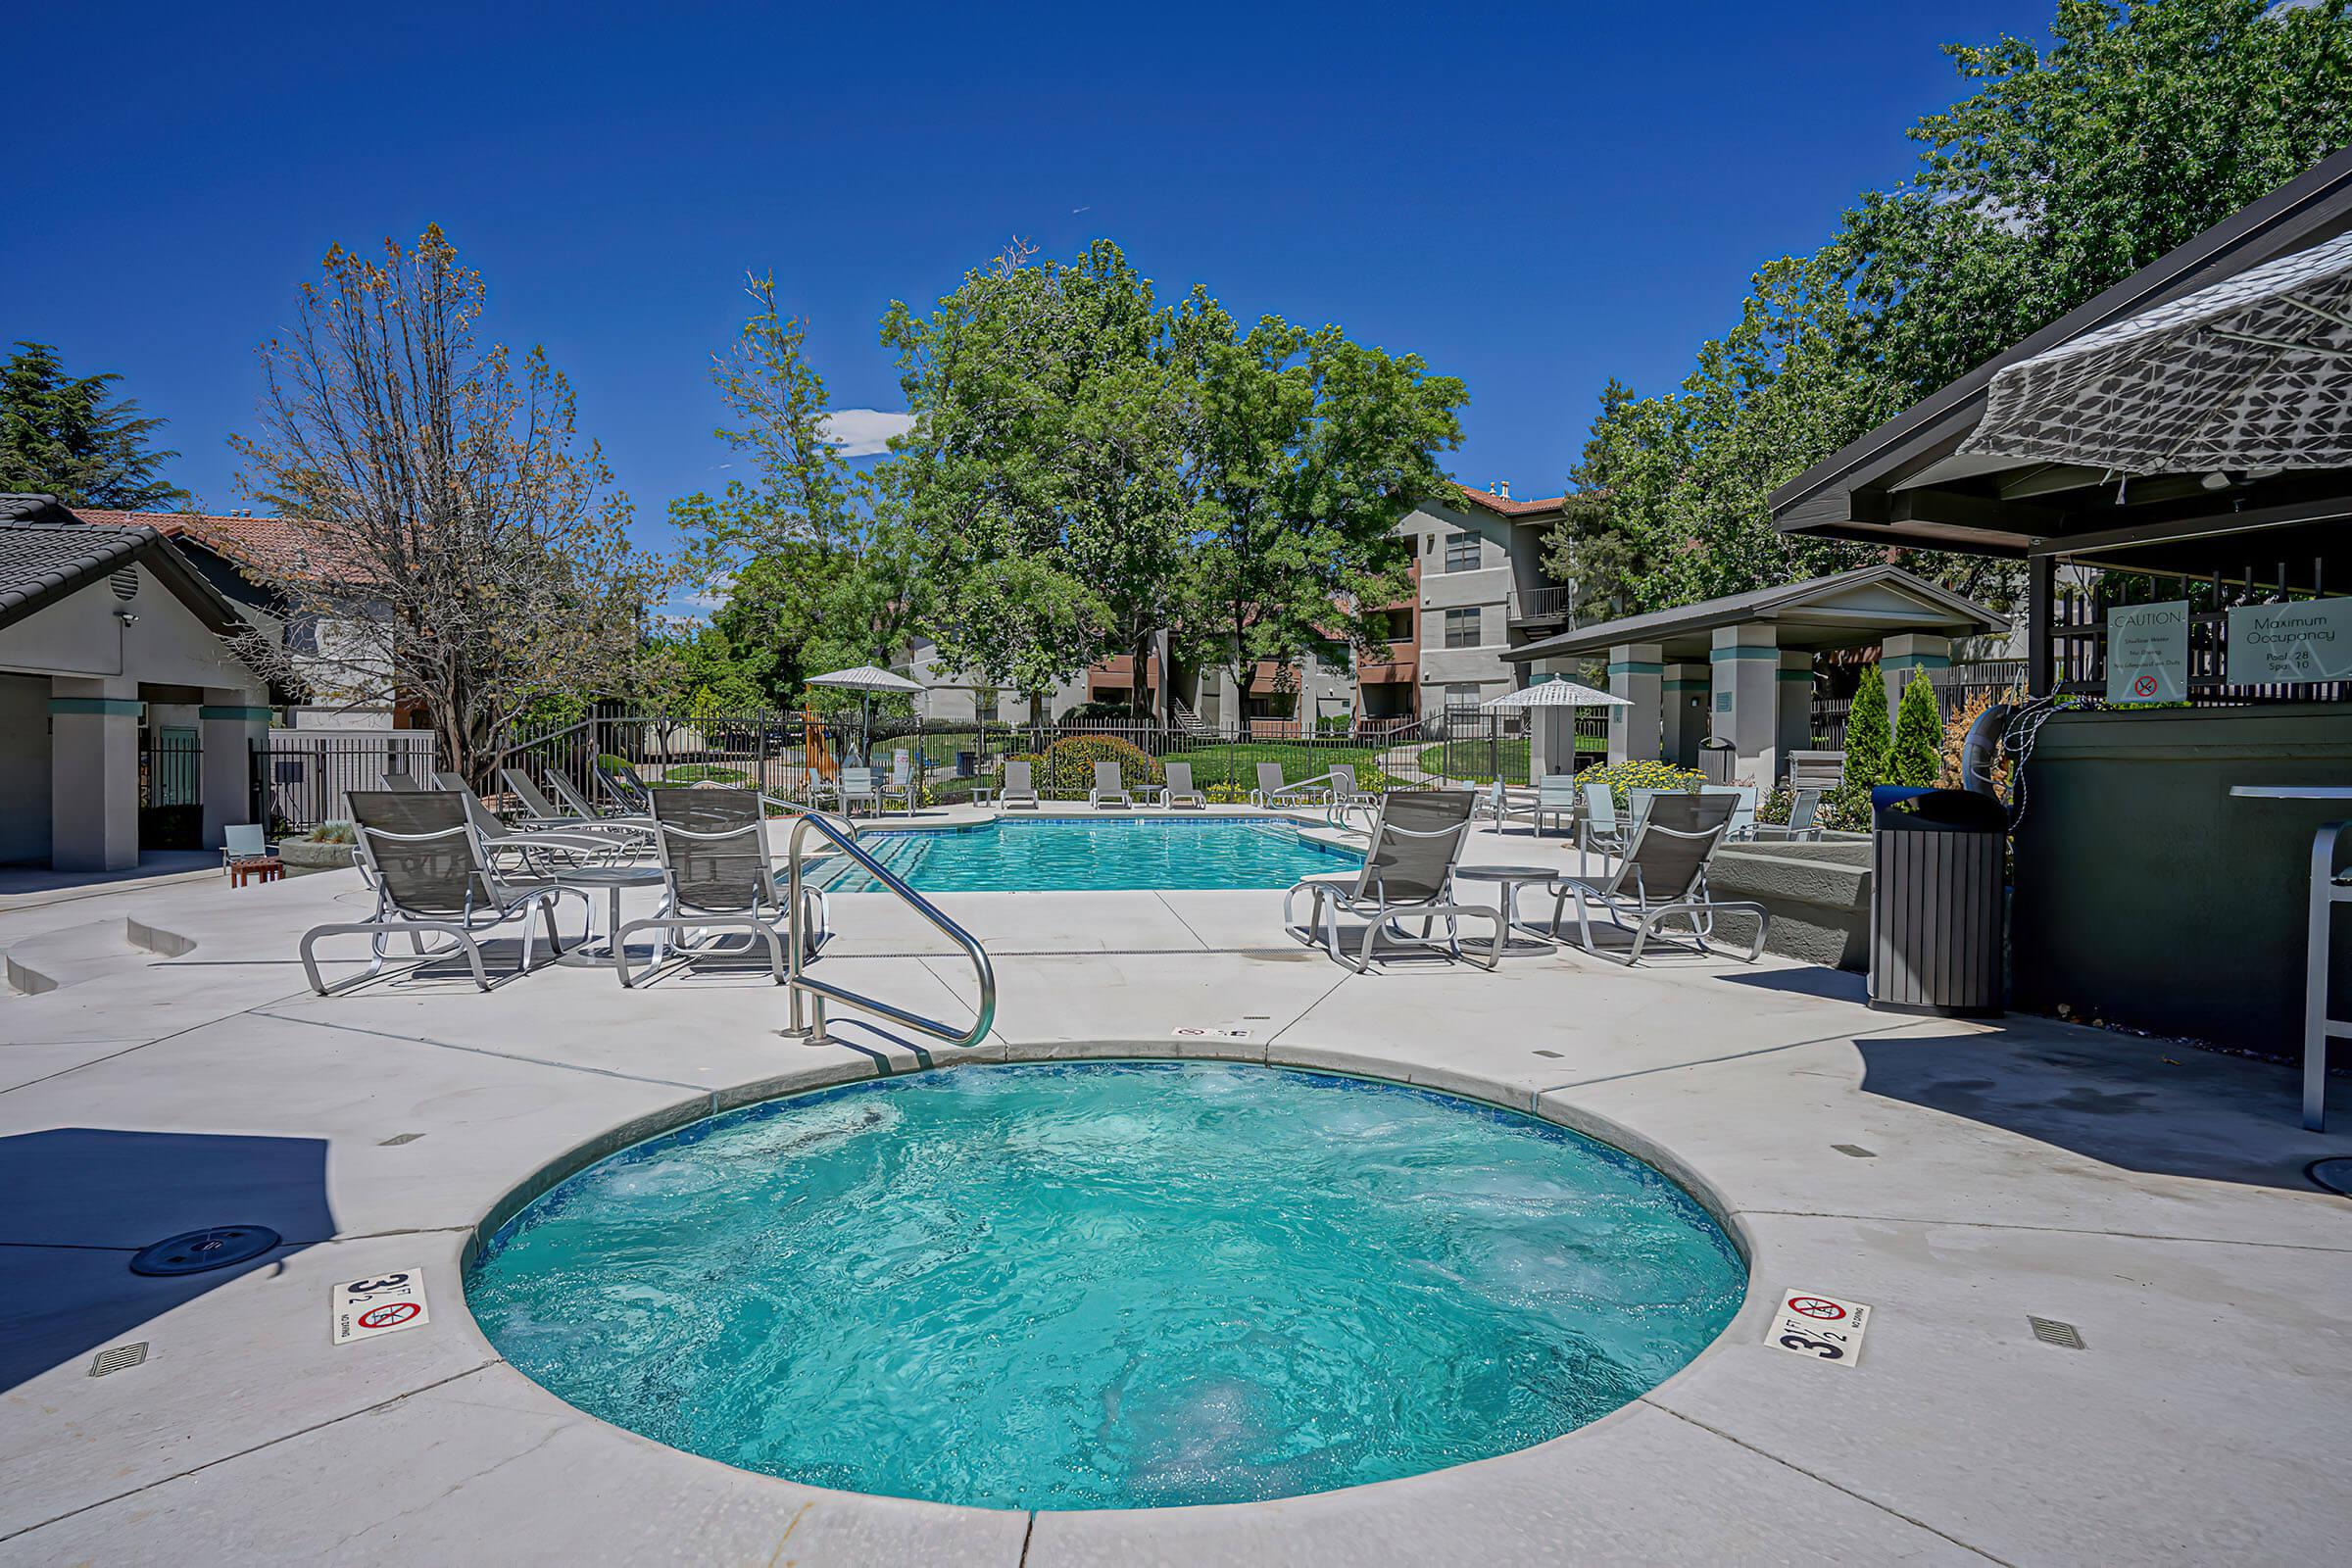 Soothing Spa - The Overlook Apartments - Albuquerque - New Mexico 